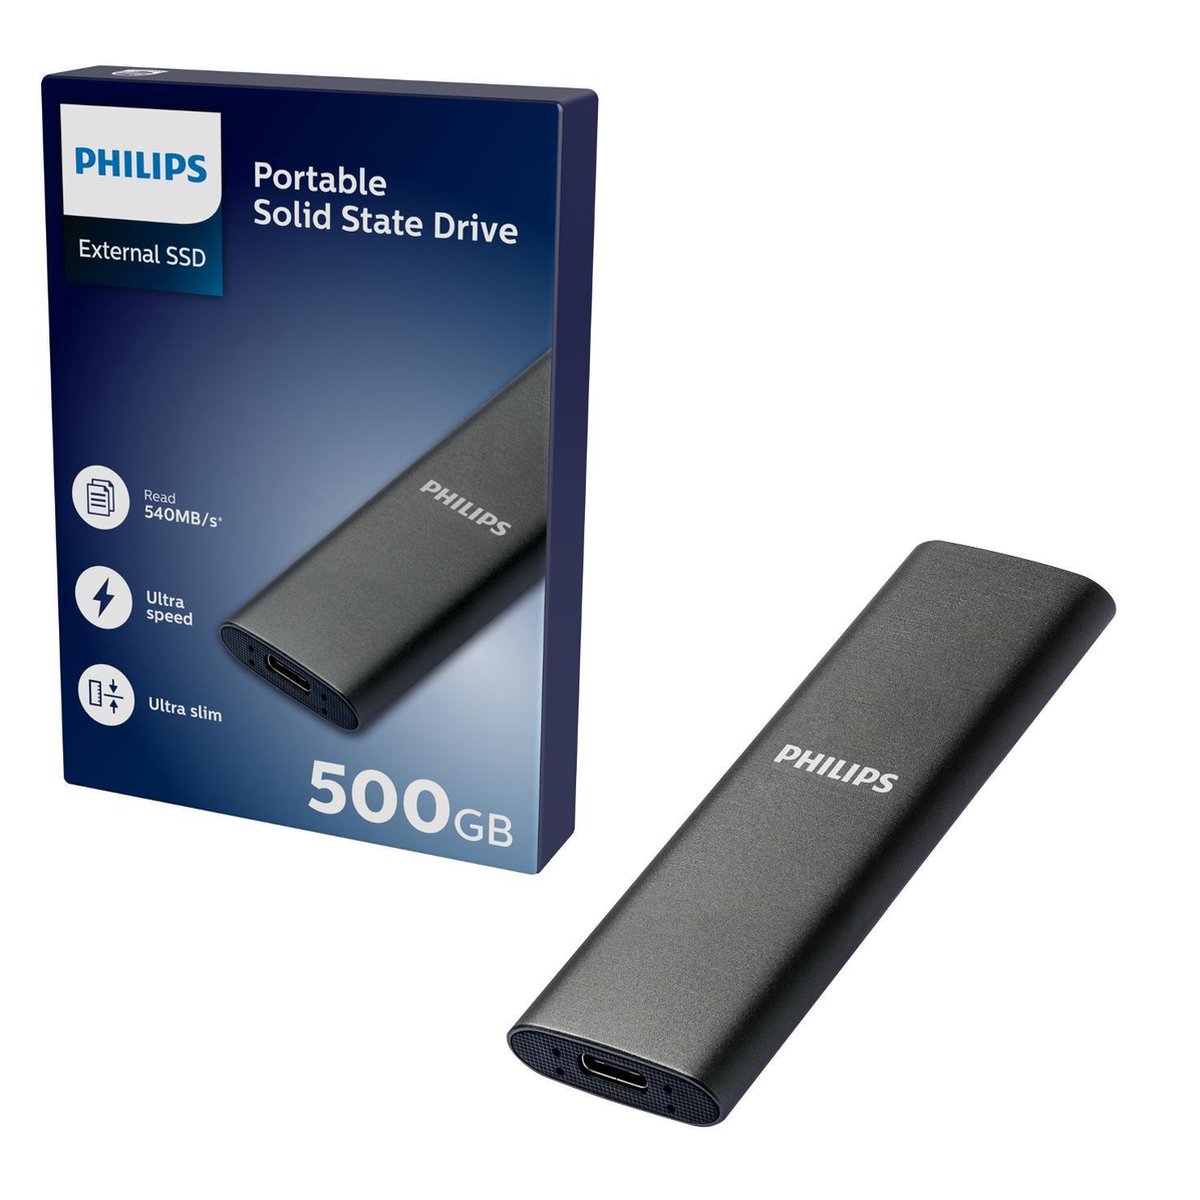 Disque dur externe Philips SSD 250 Go, USB3.2, space grey